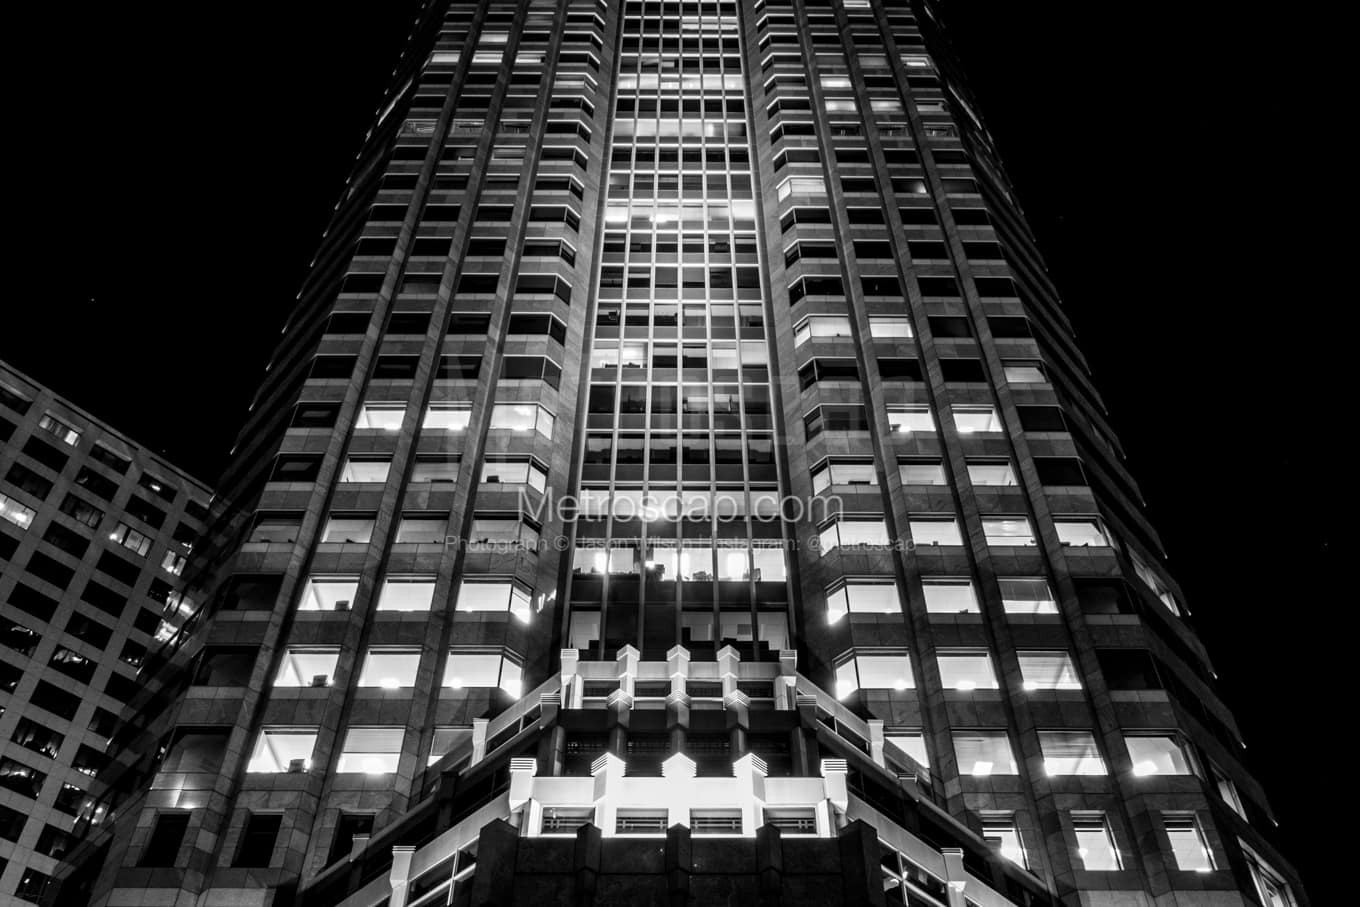 Black & White Los Angeles Architecture Pictures